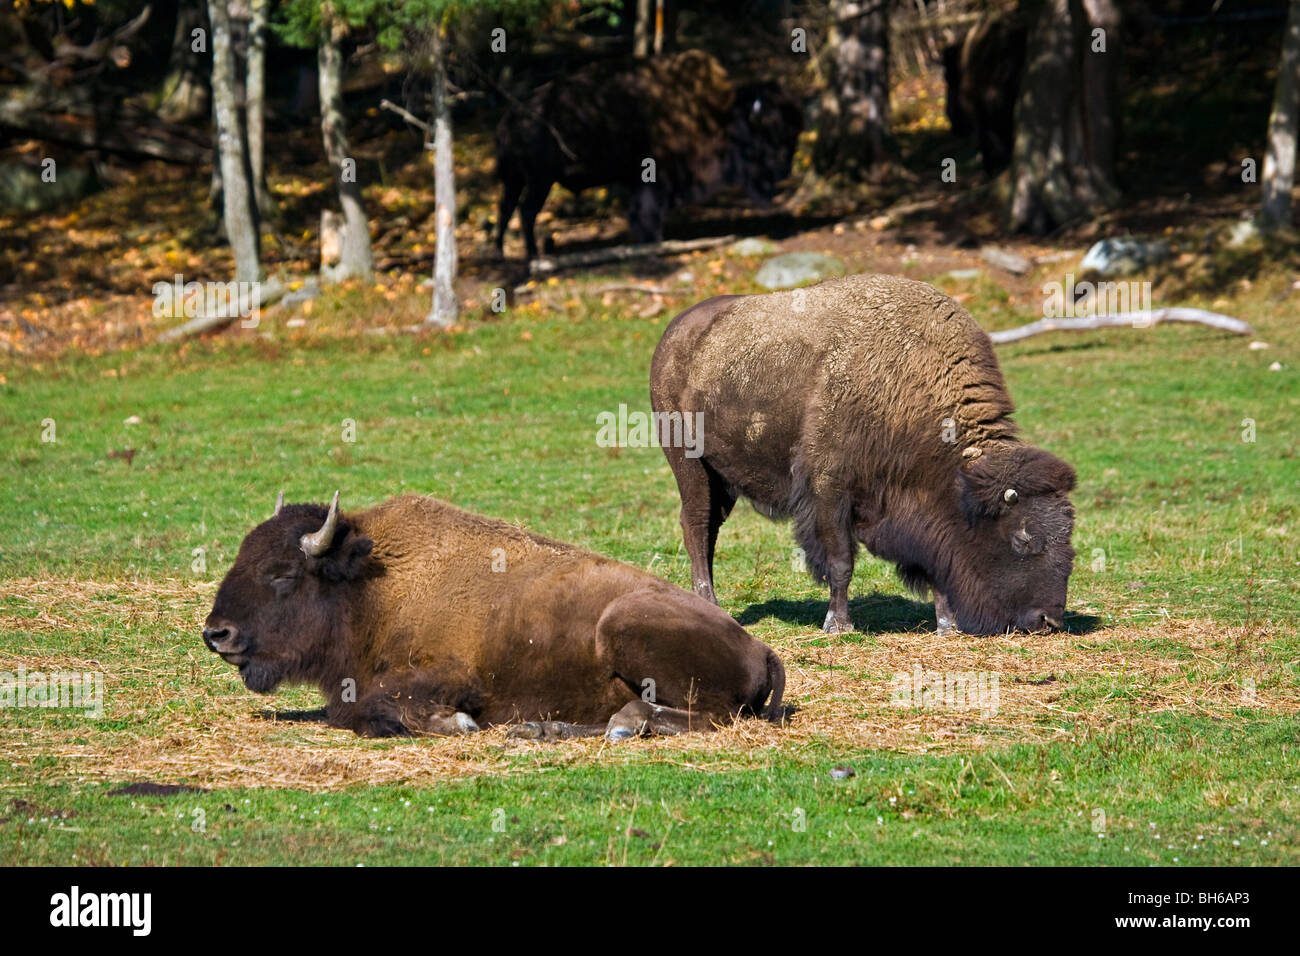 Bison, Bison bison, (aka Buffalo) in Les Prairies at Parc Omega in Montebello, Outaouais, Quebec, Canada. Stock Photo